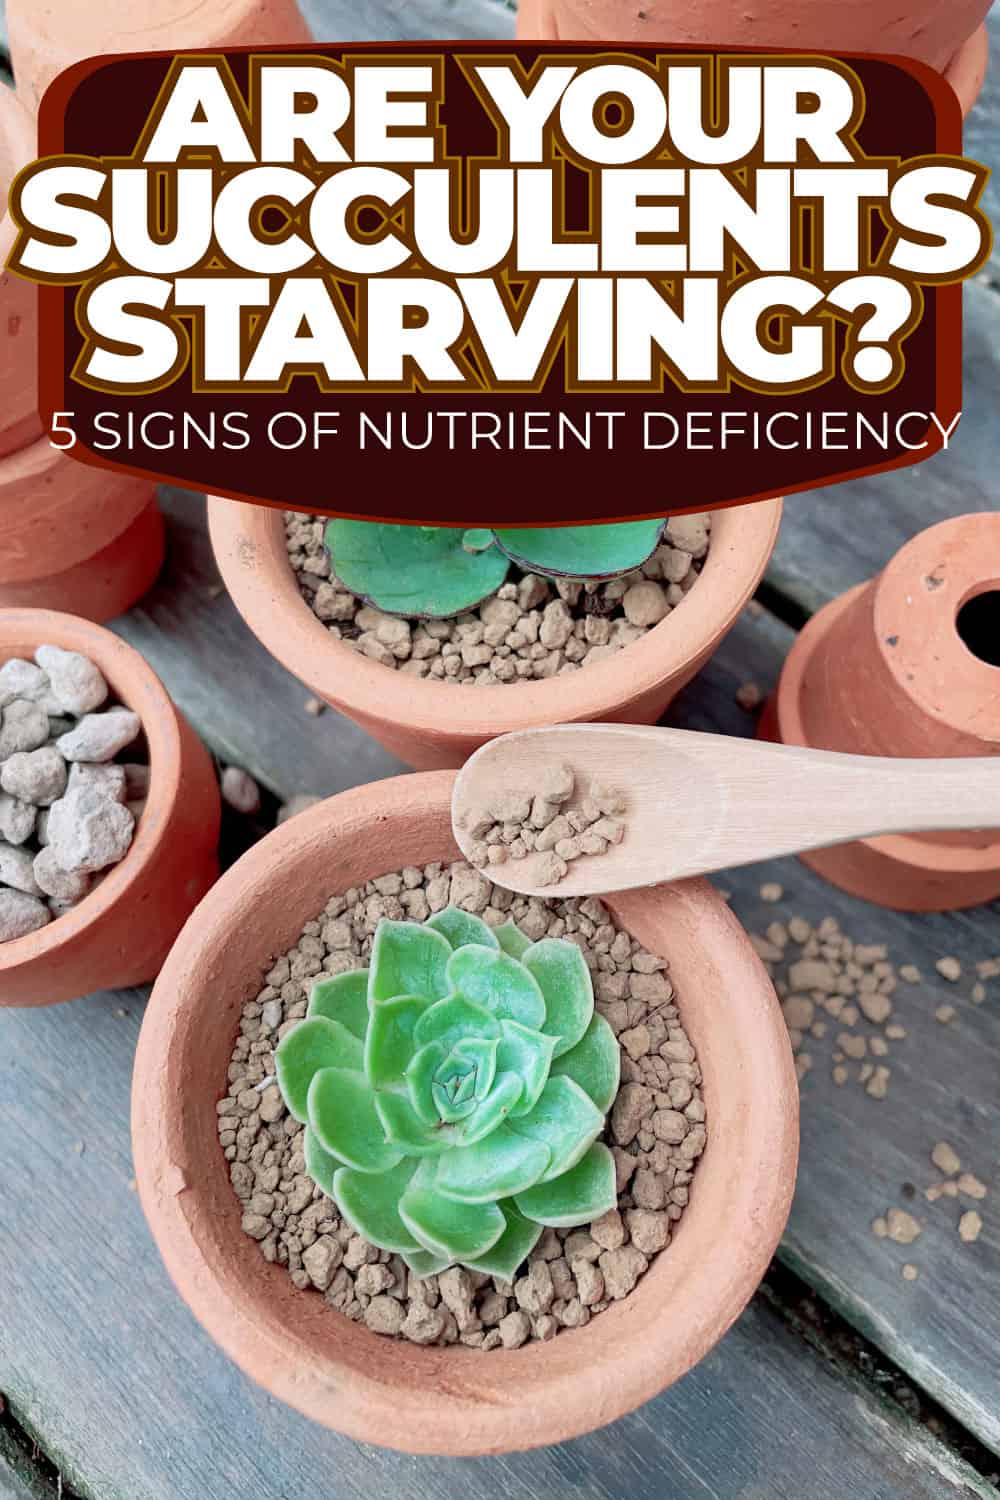 Are Your Succulents Starving 5 Signs of Nutrient Deficiency